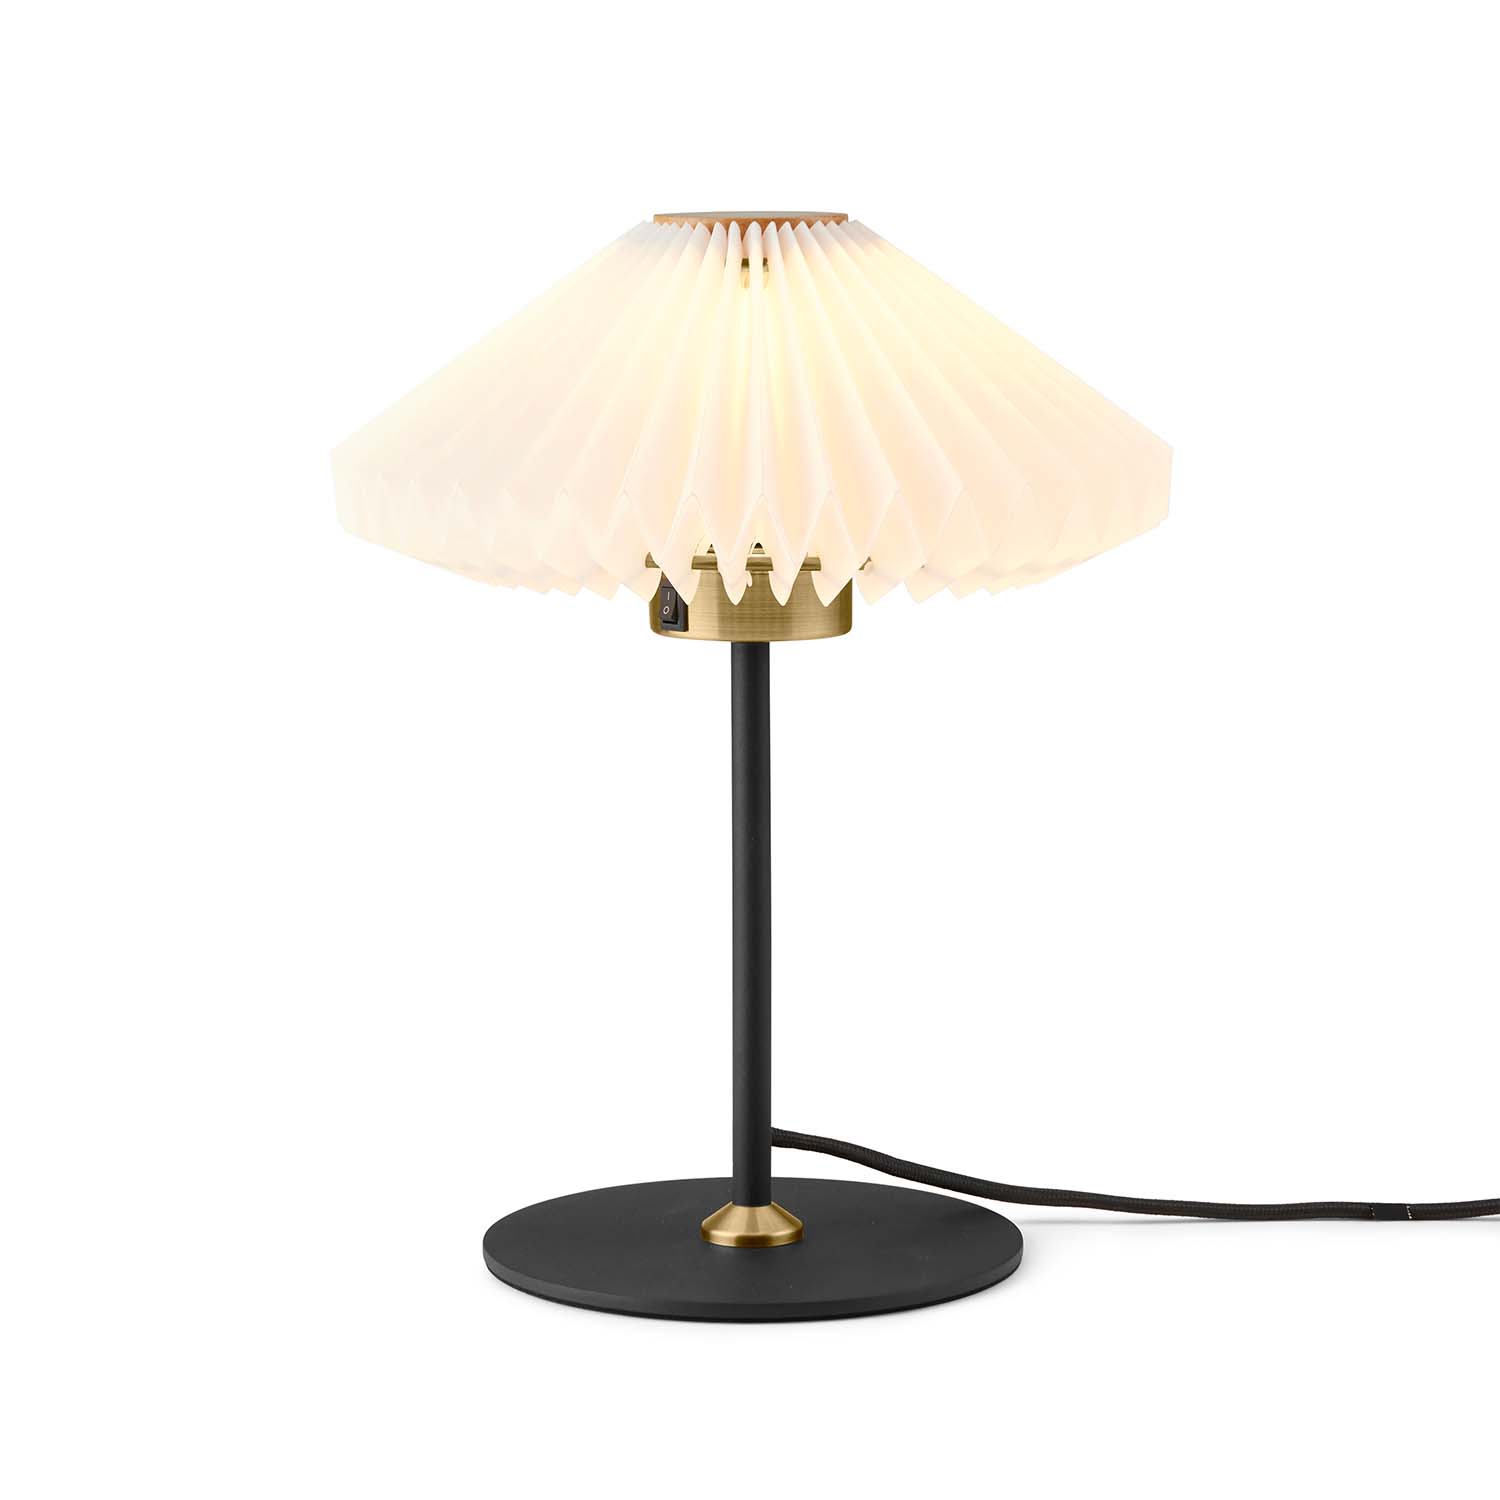 PARIS - Table lamp with chic and designer pleated lampshade